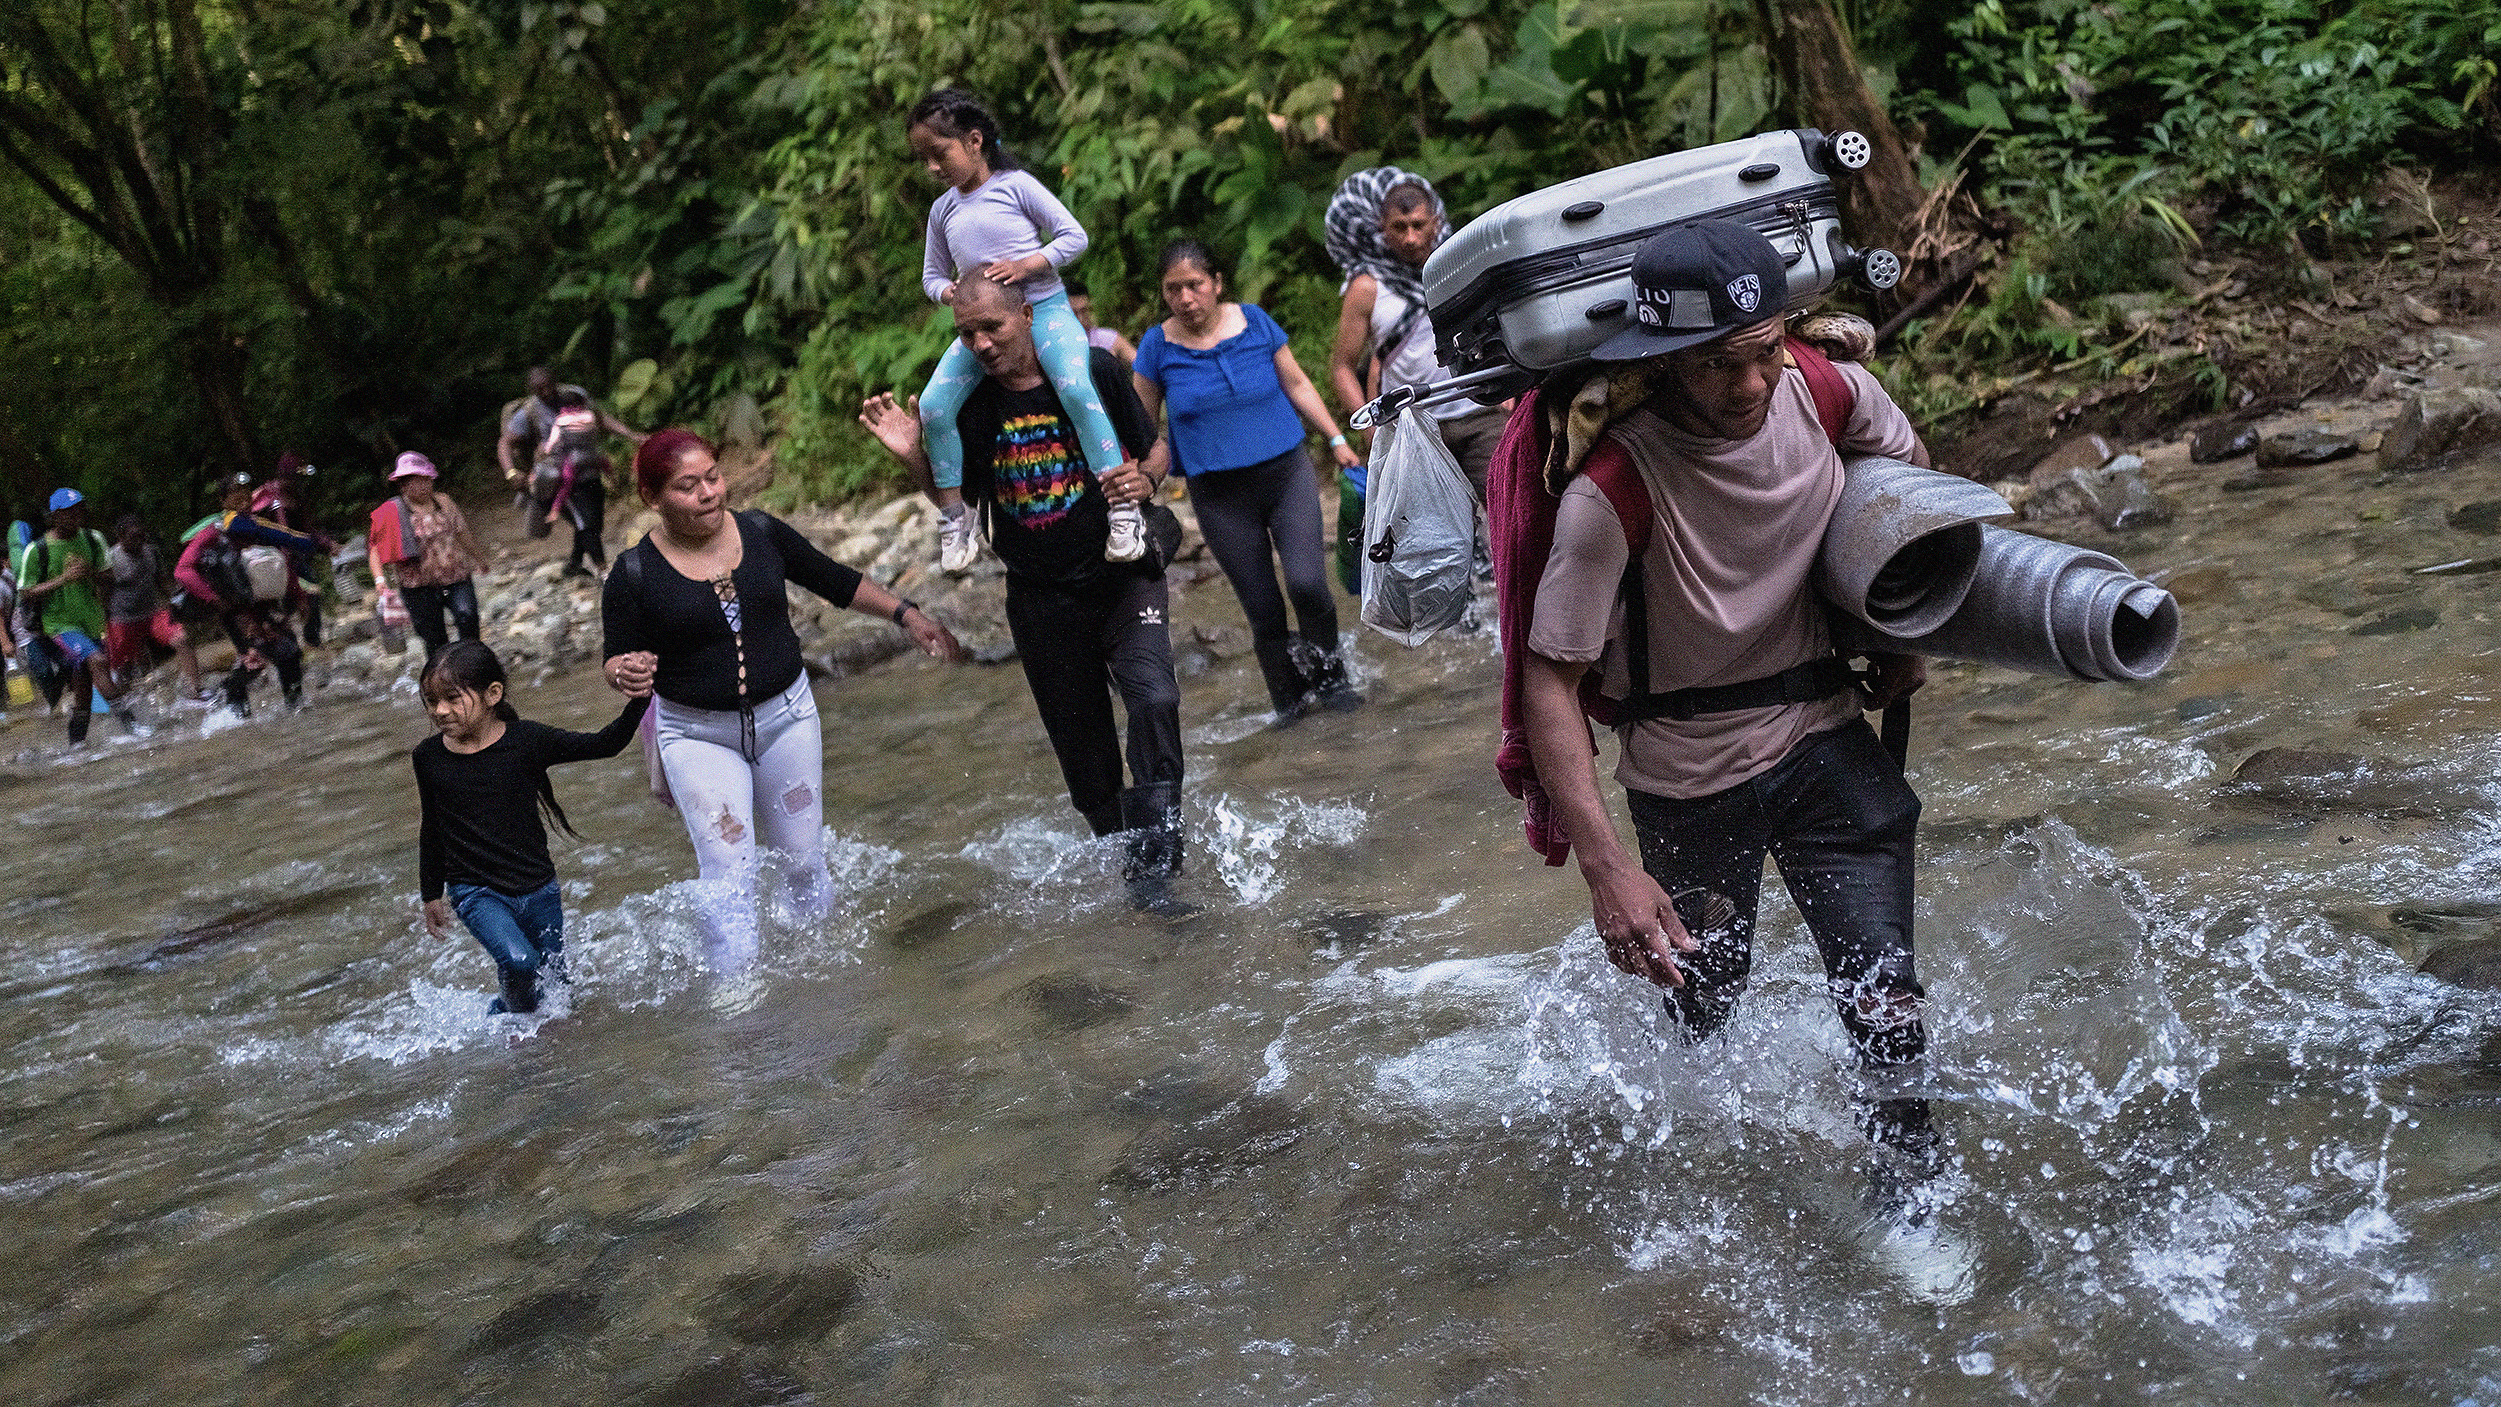 A group of people, including children, wade through a shallow river in the forested area of the Darién Gap. One person carries a suitcase and other luggage on their back.